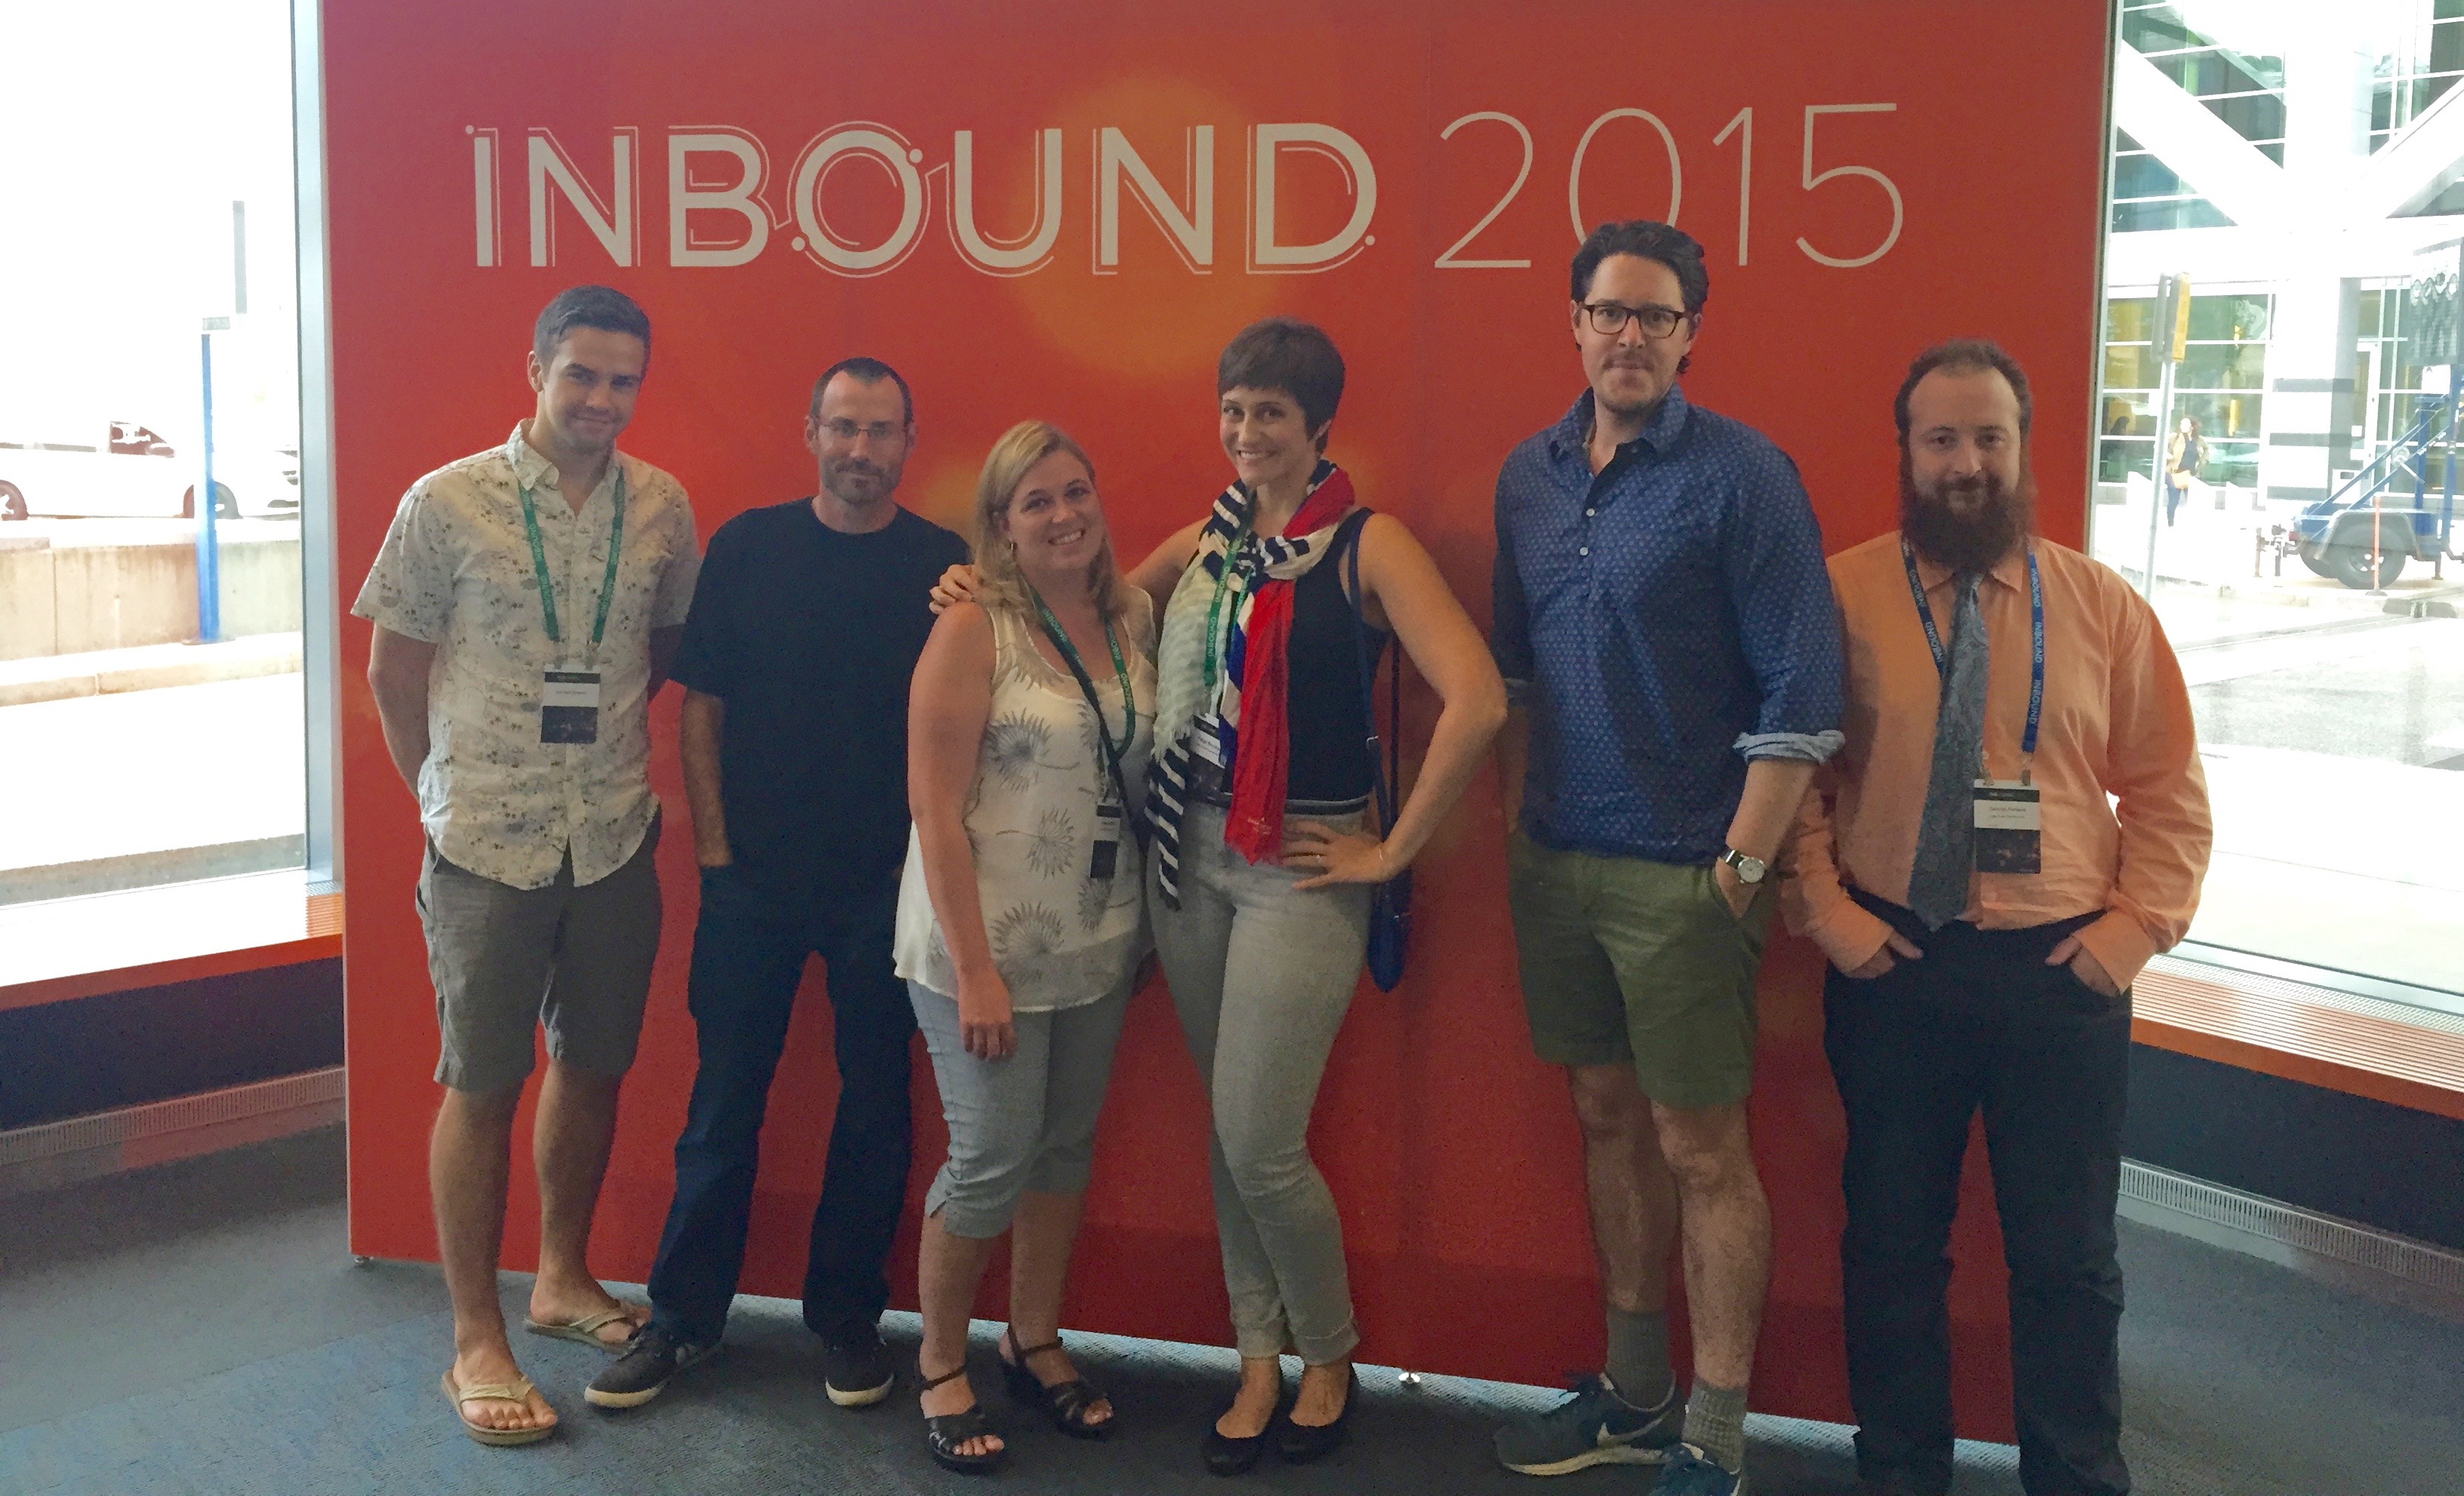 Our HubSpot INBOUND 2015 Conference Takeaways & Deep Thoughts